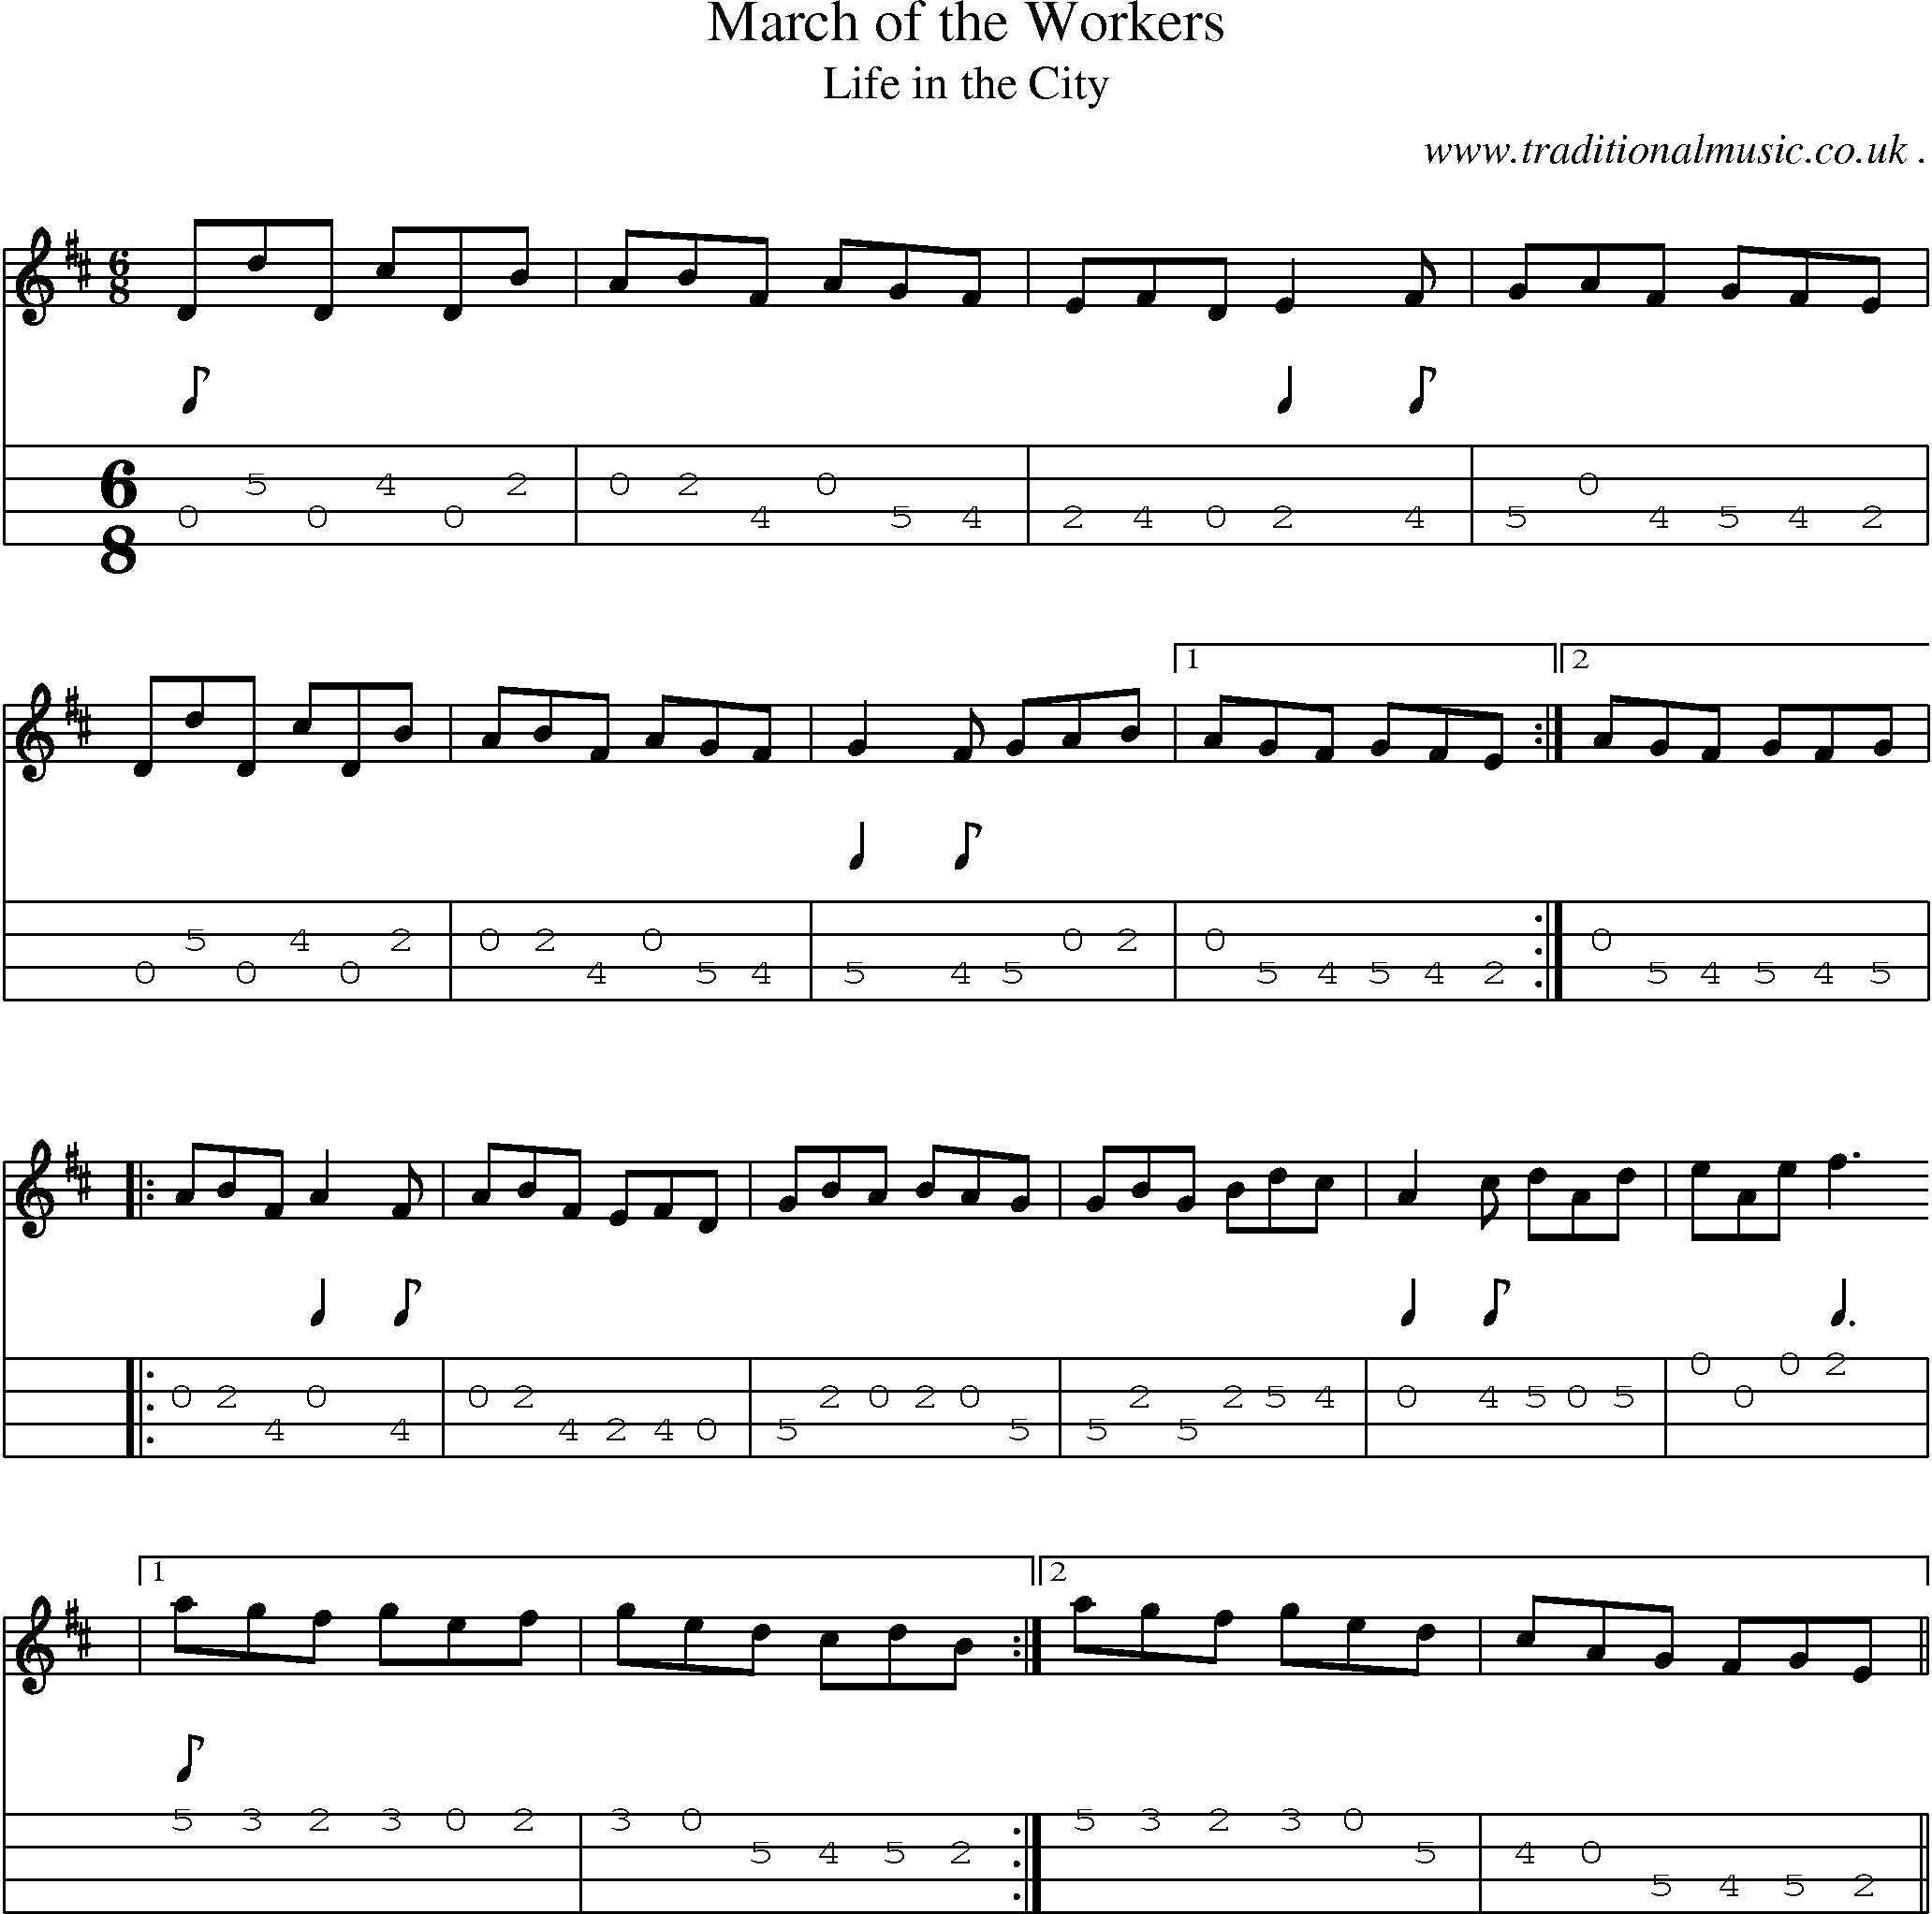 Sheet-music  score, Chords and Mandolin Tabs for March Of The Workers